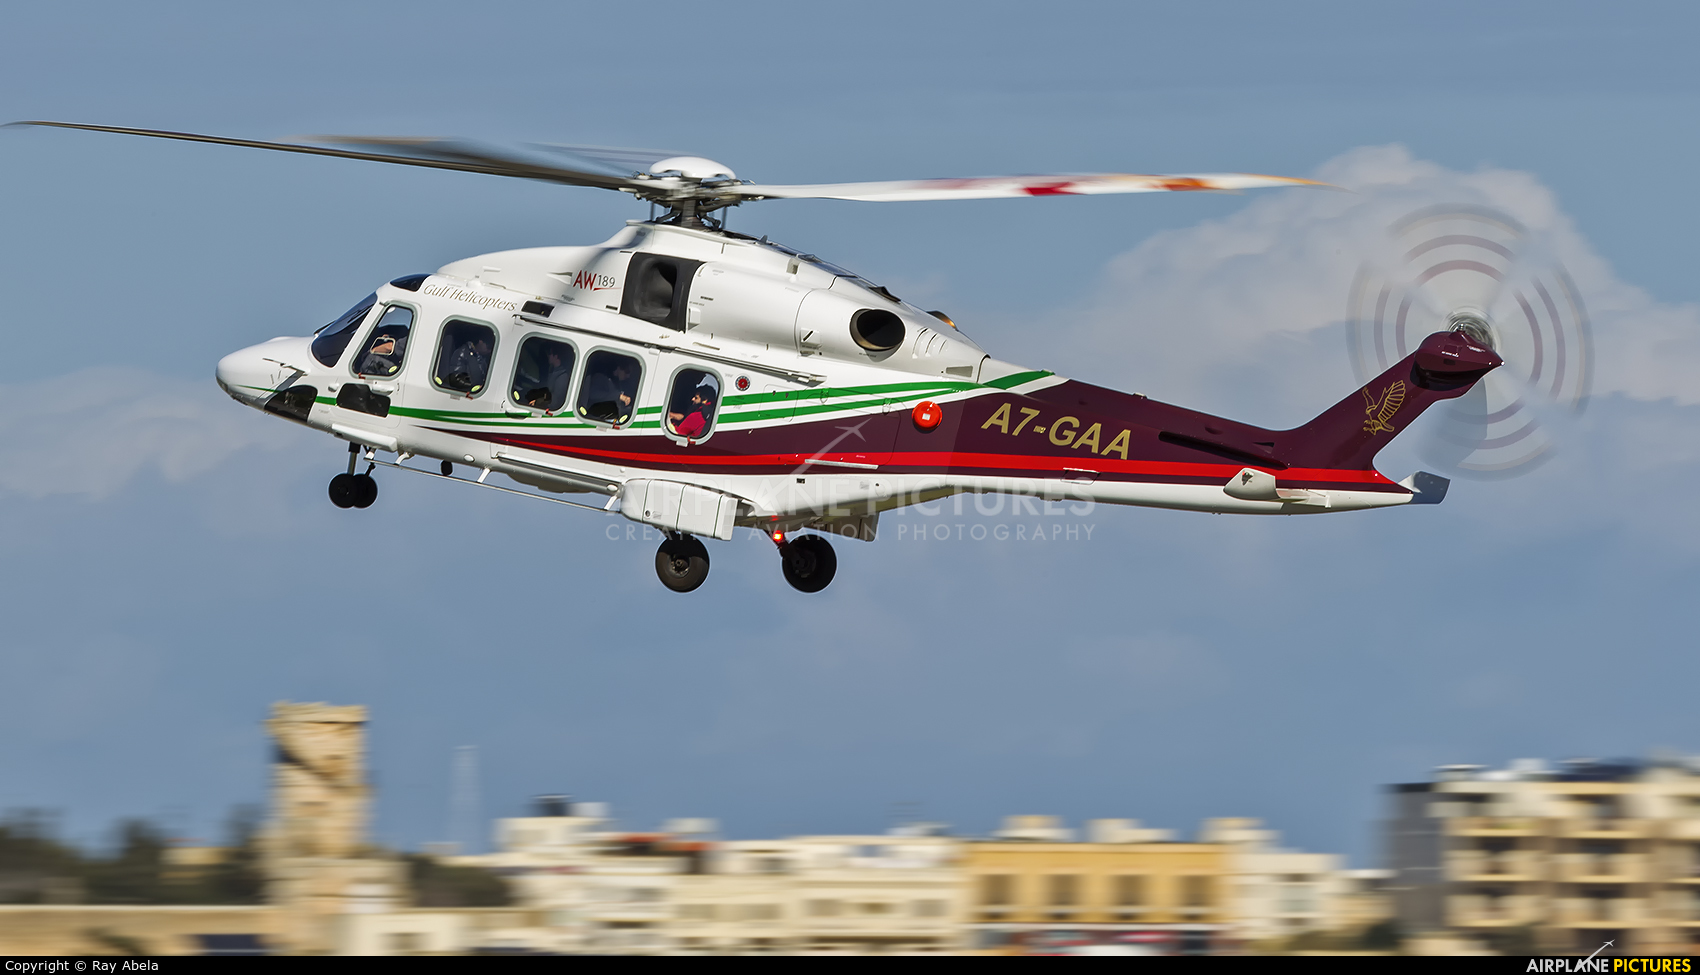 Gulf Helicopters A7-GAA aircraft at Malta Intl